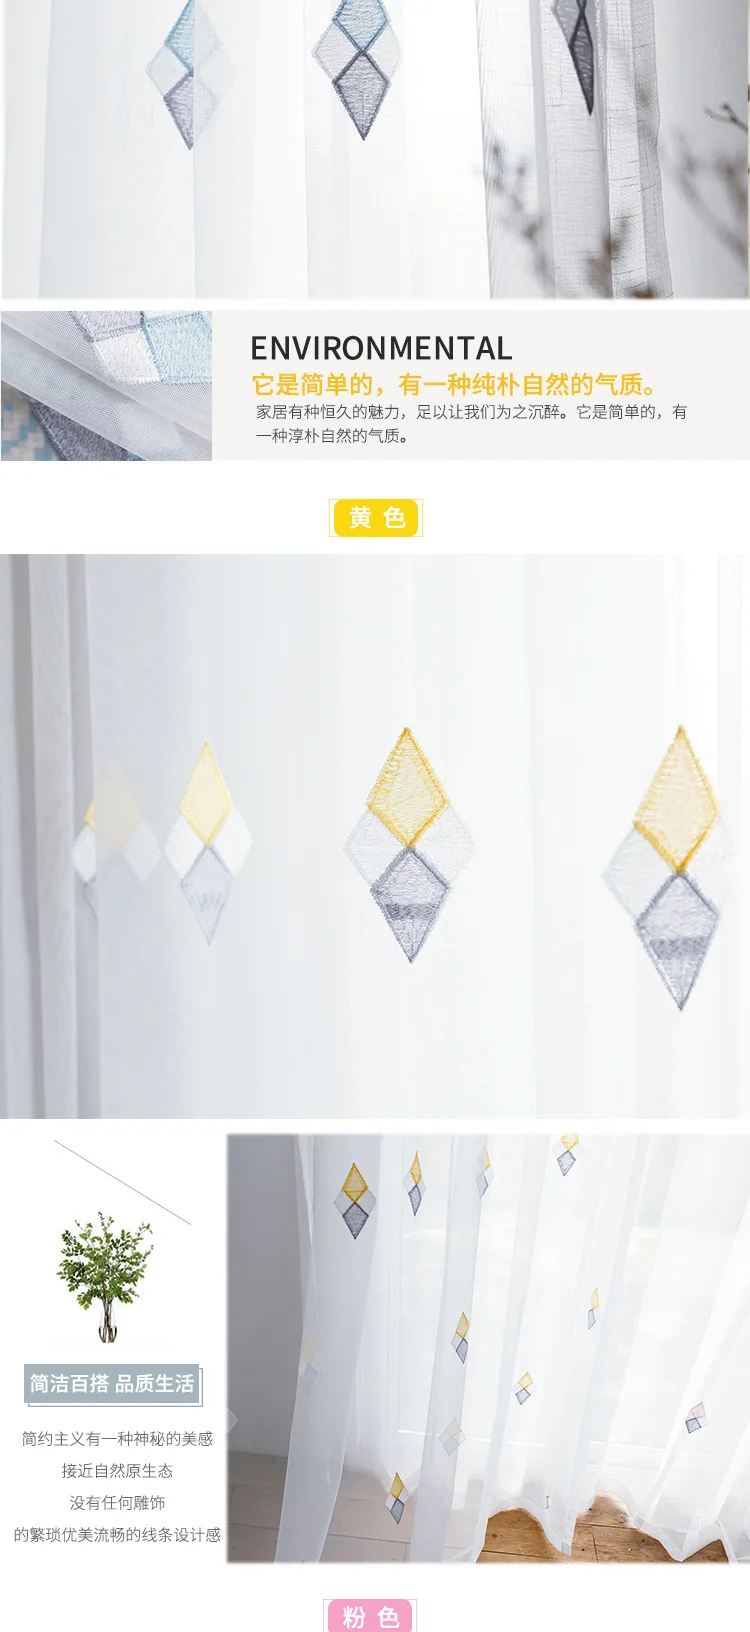 Decorative Tulle Curtains For Living Room Bedroom Geometry Embroidered Volie Tulle Window Door Drapes White Sheers White